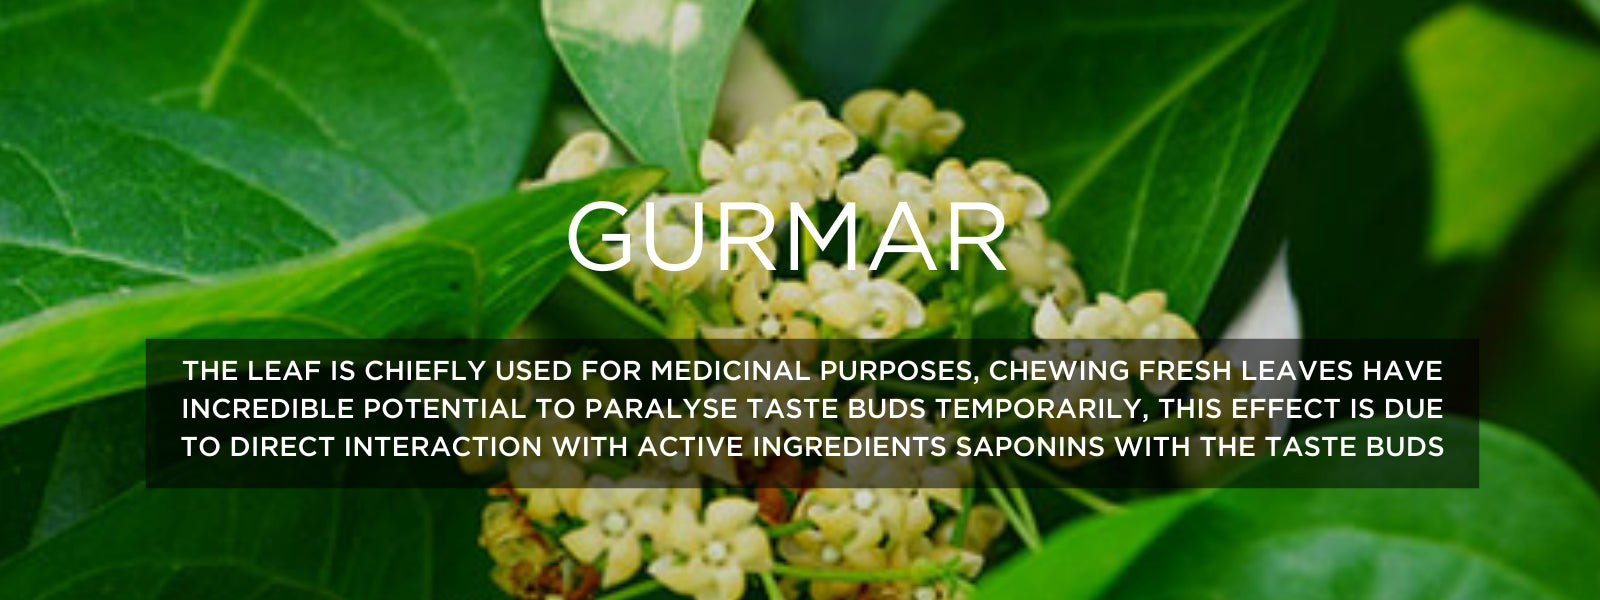 Gurmar - Health Benefits, Uses and Important Facts